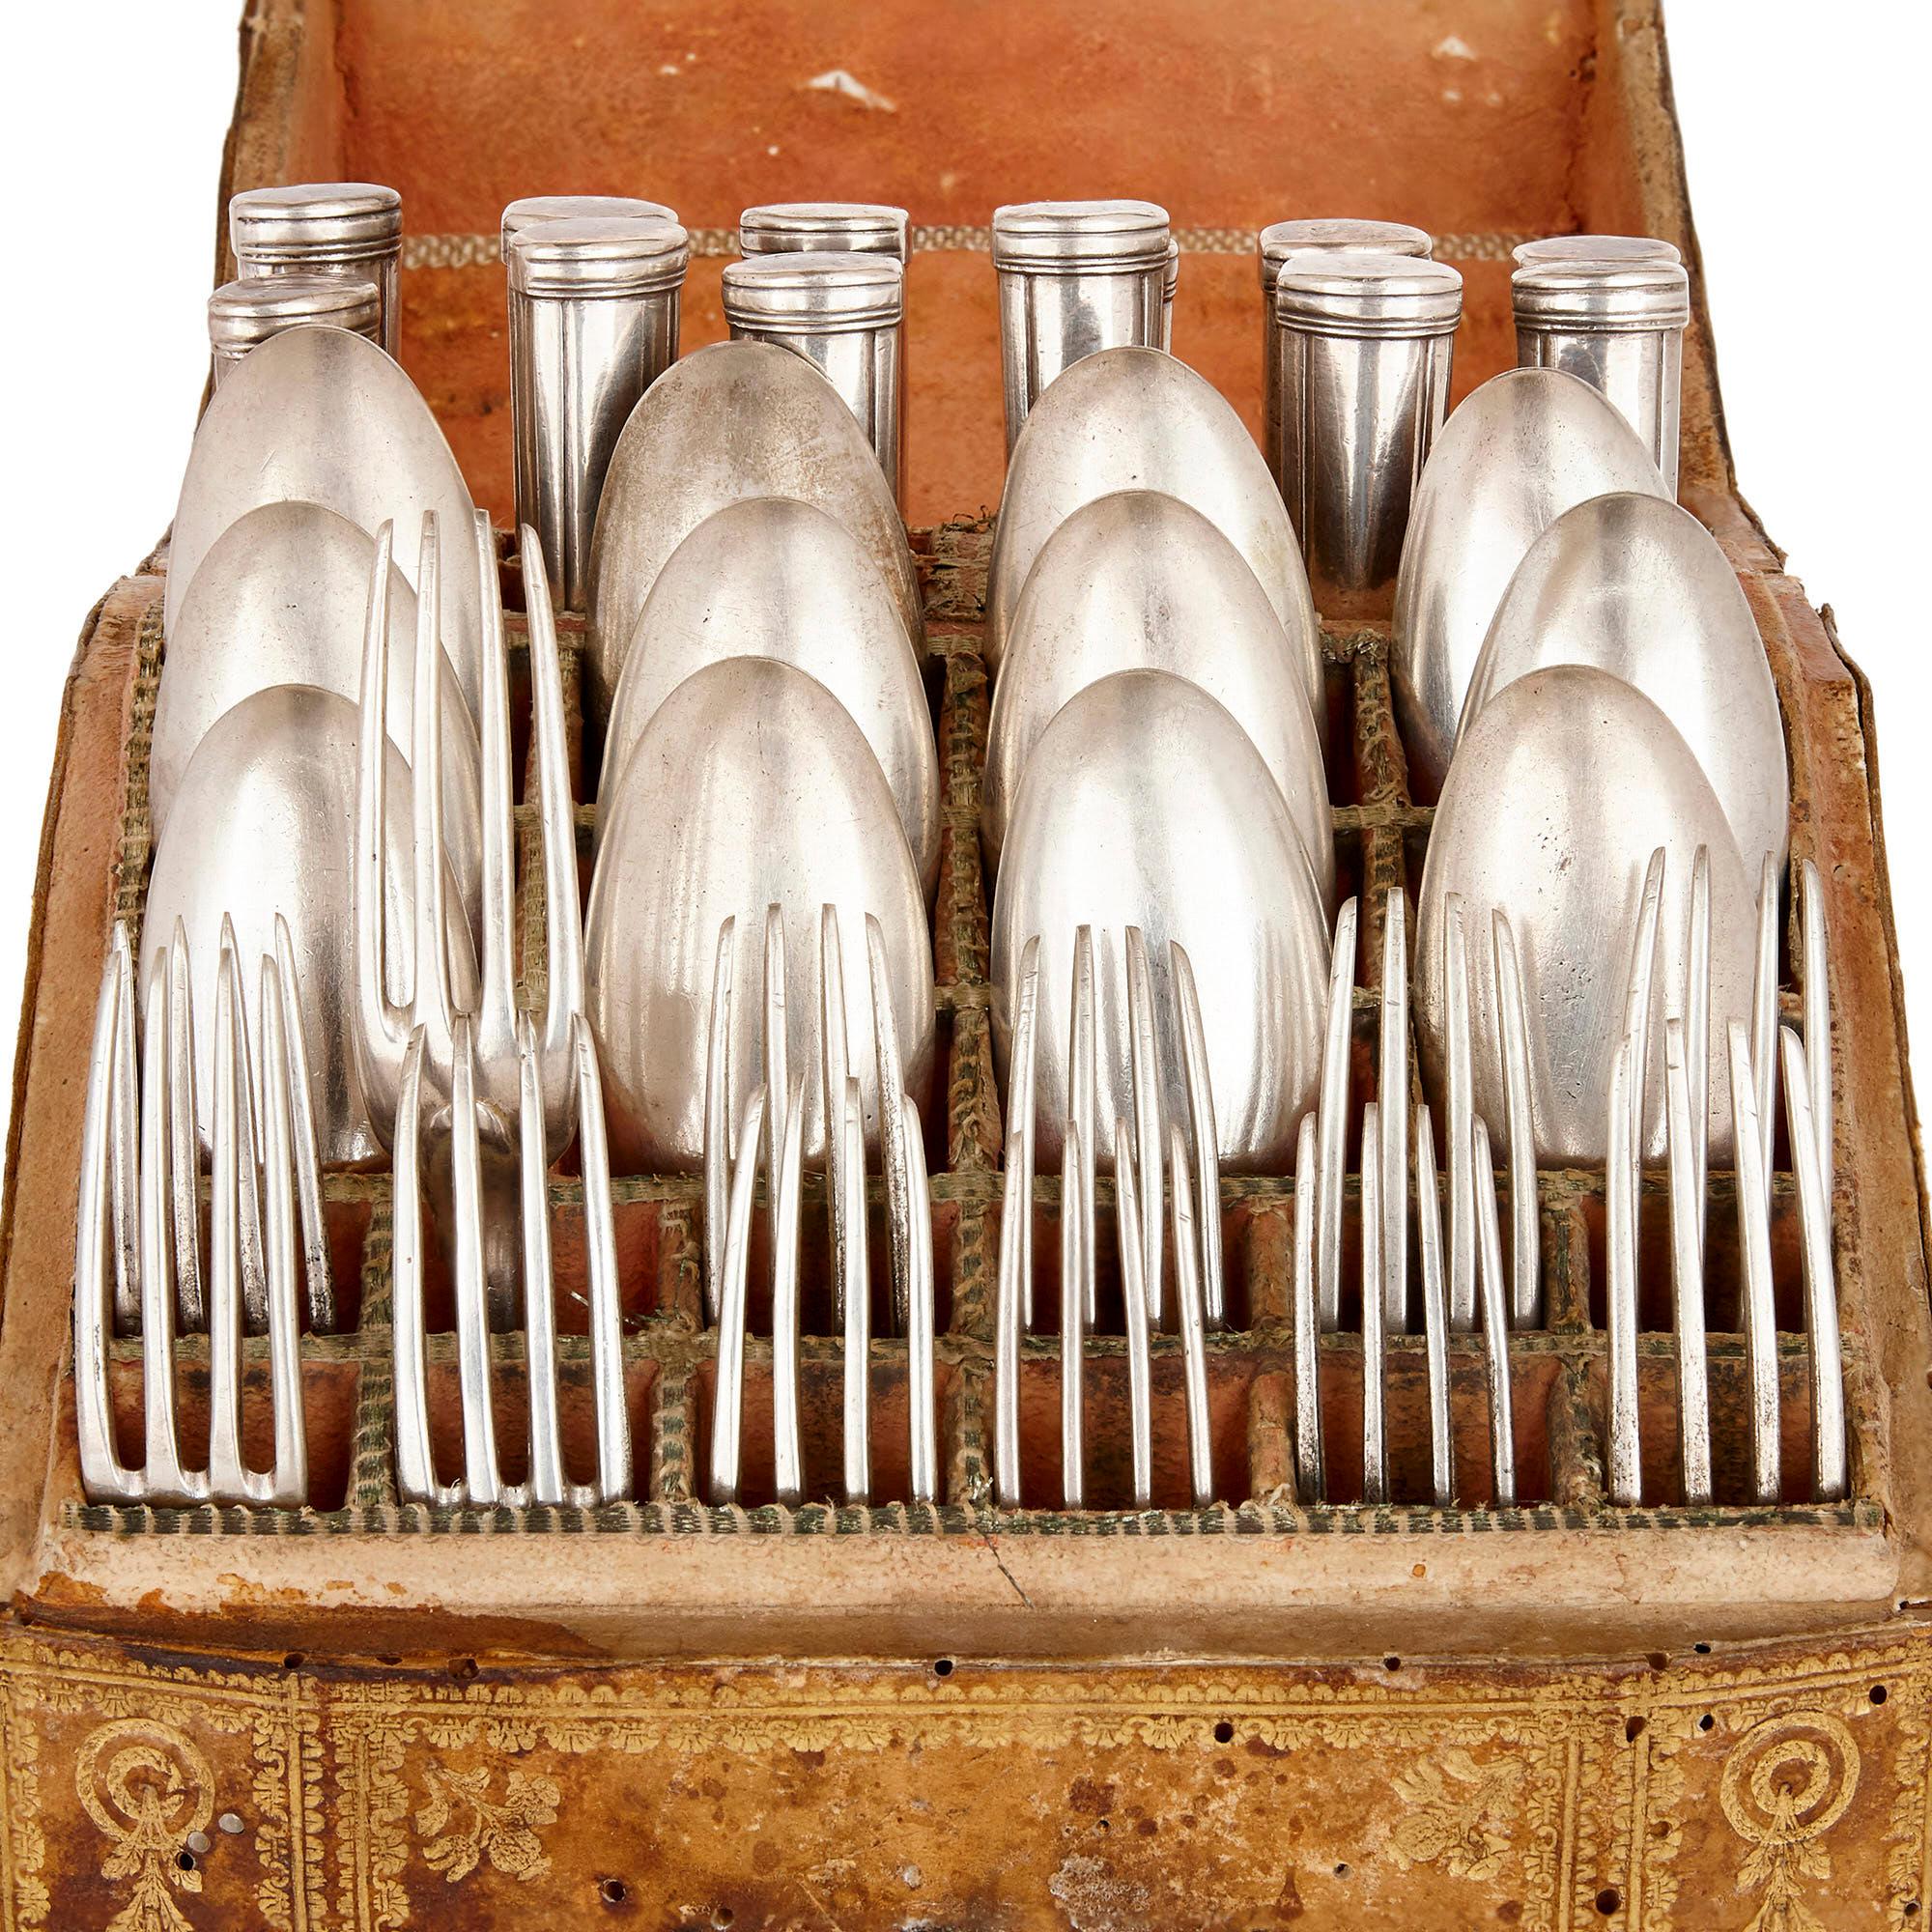 This composite service comprises 36 pieces, the twelve forks, twelve knives, and twelve spoons produced at various points between 1732 and 1815 by at least one Roman maker—Basilio Faffucci. The 36 pieces are fully hallmarked with a variety of date